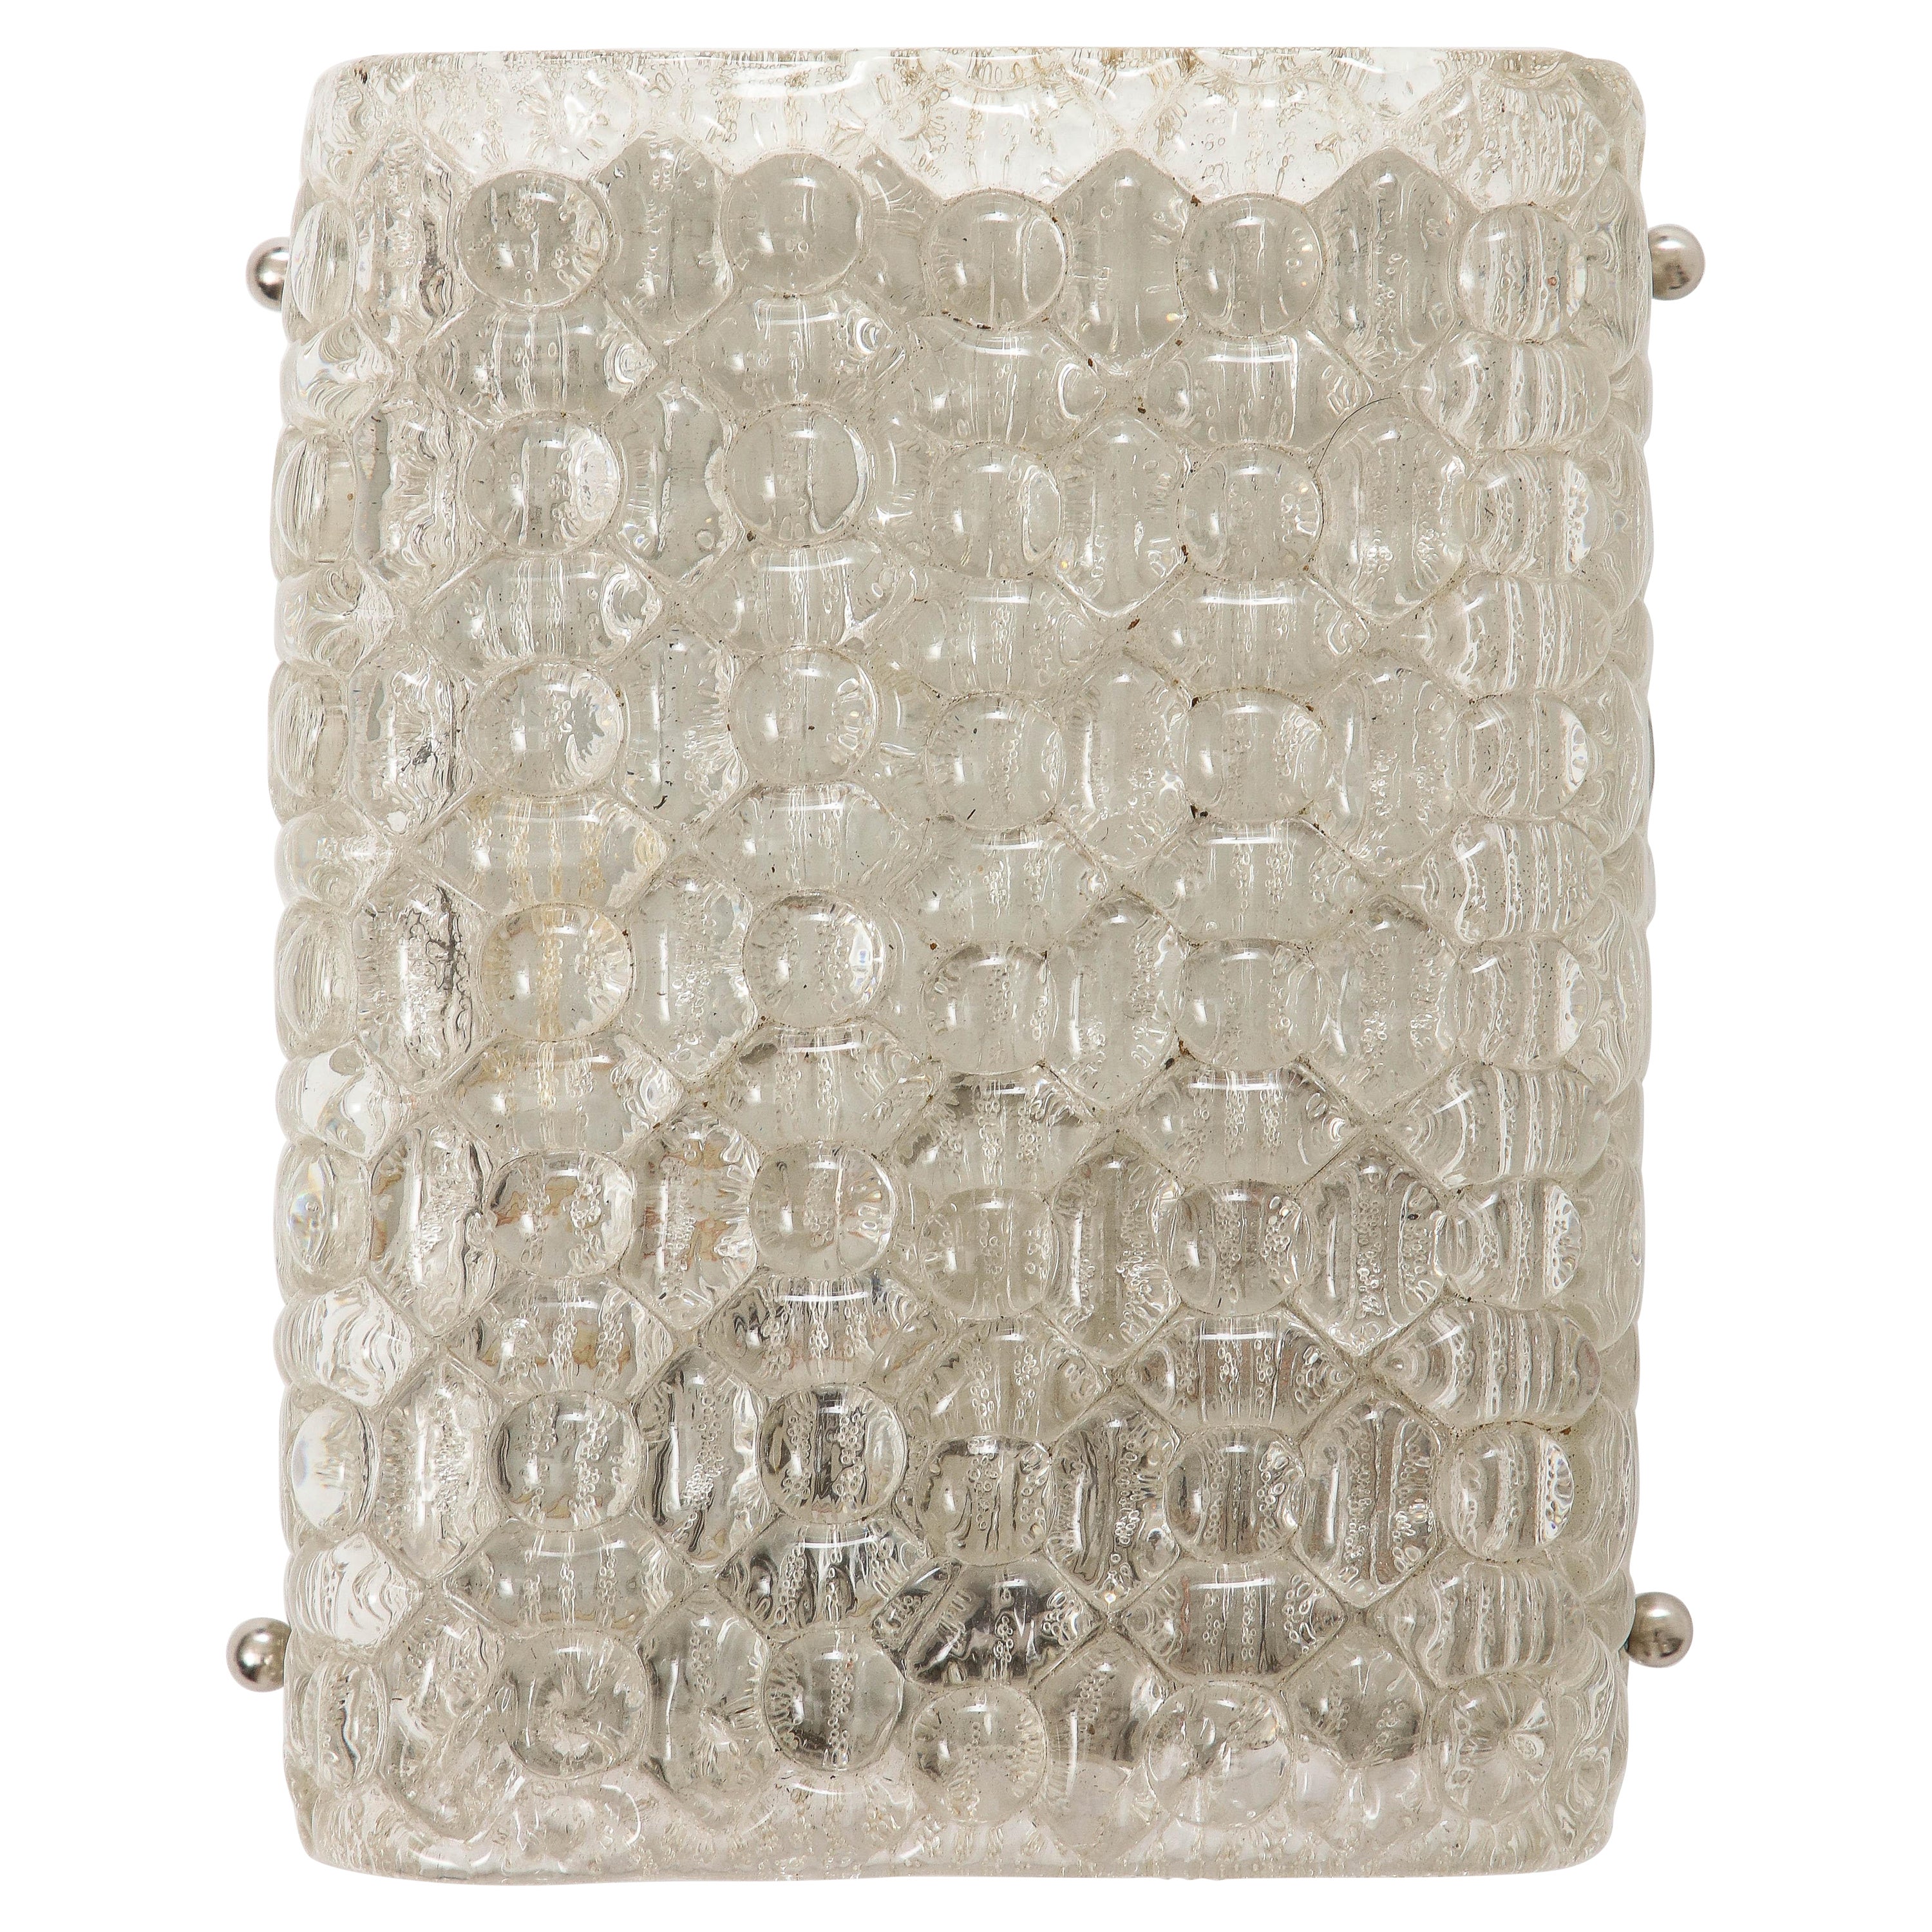 Single, Orrefors Bubbled Crystal Sconce For Sale